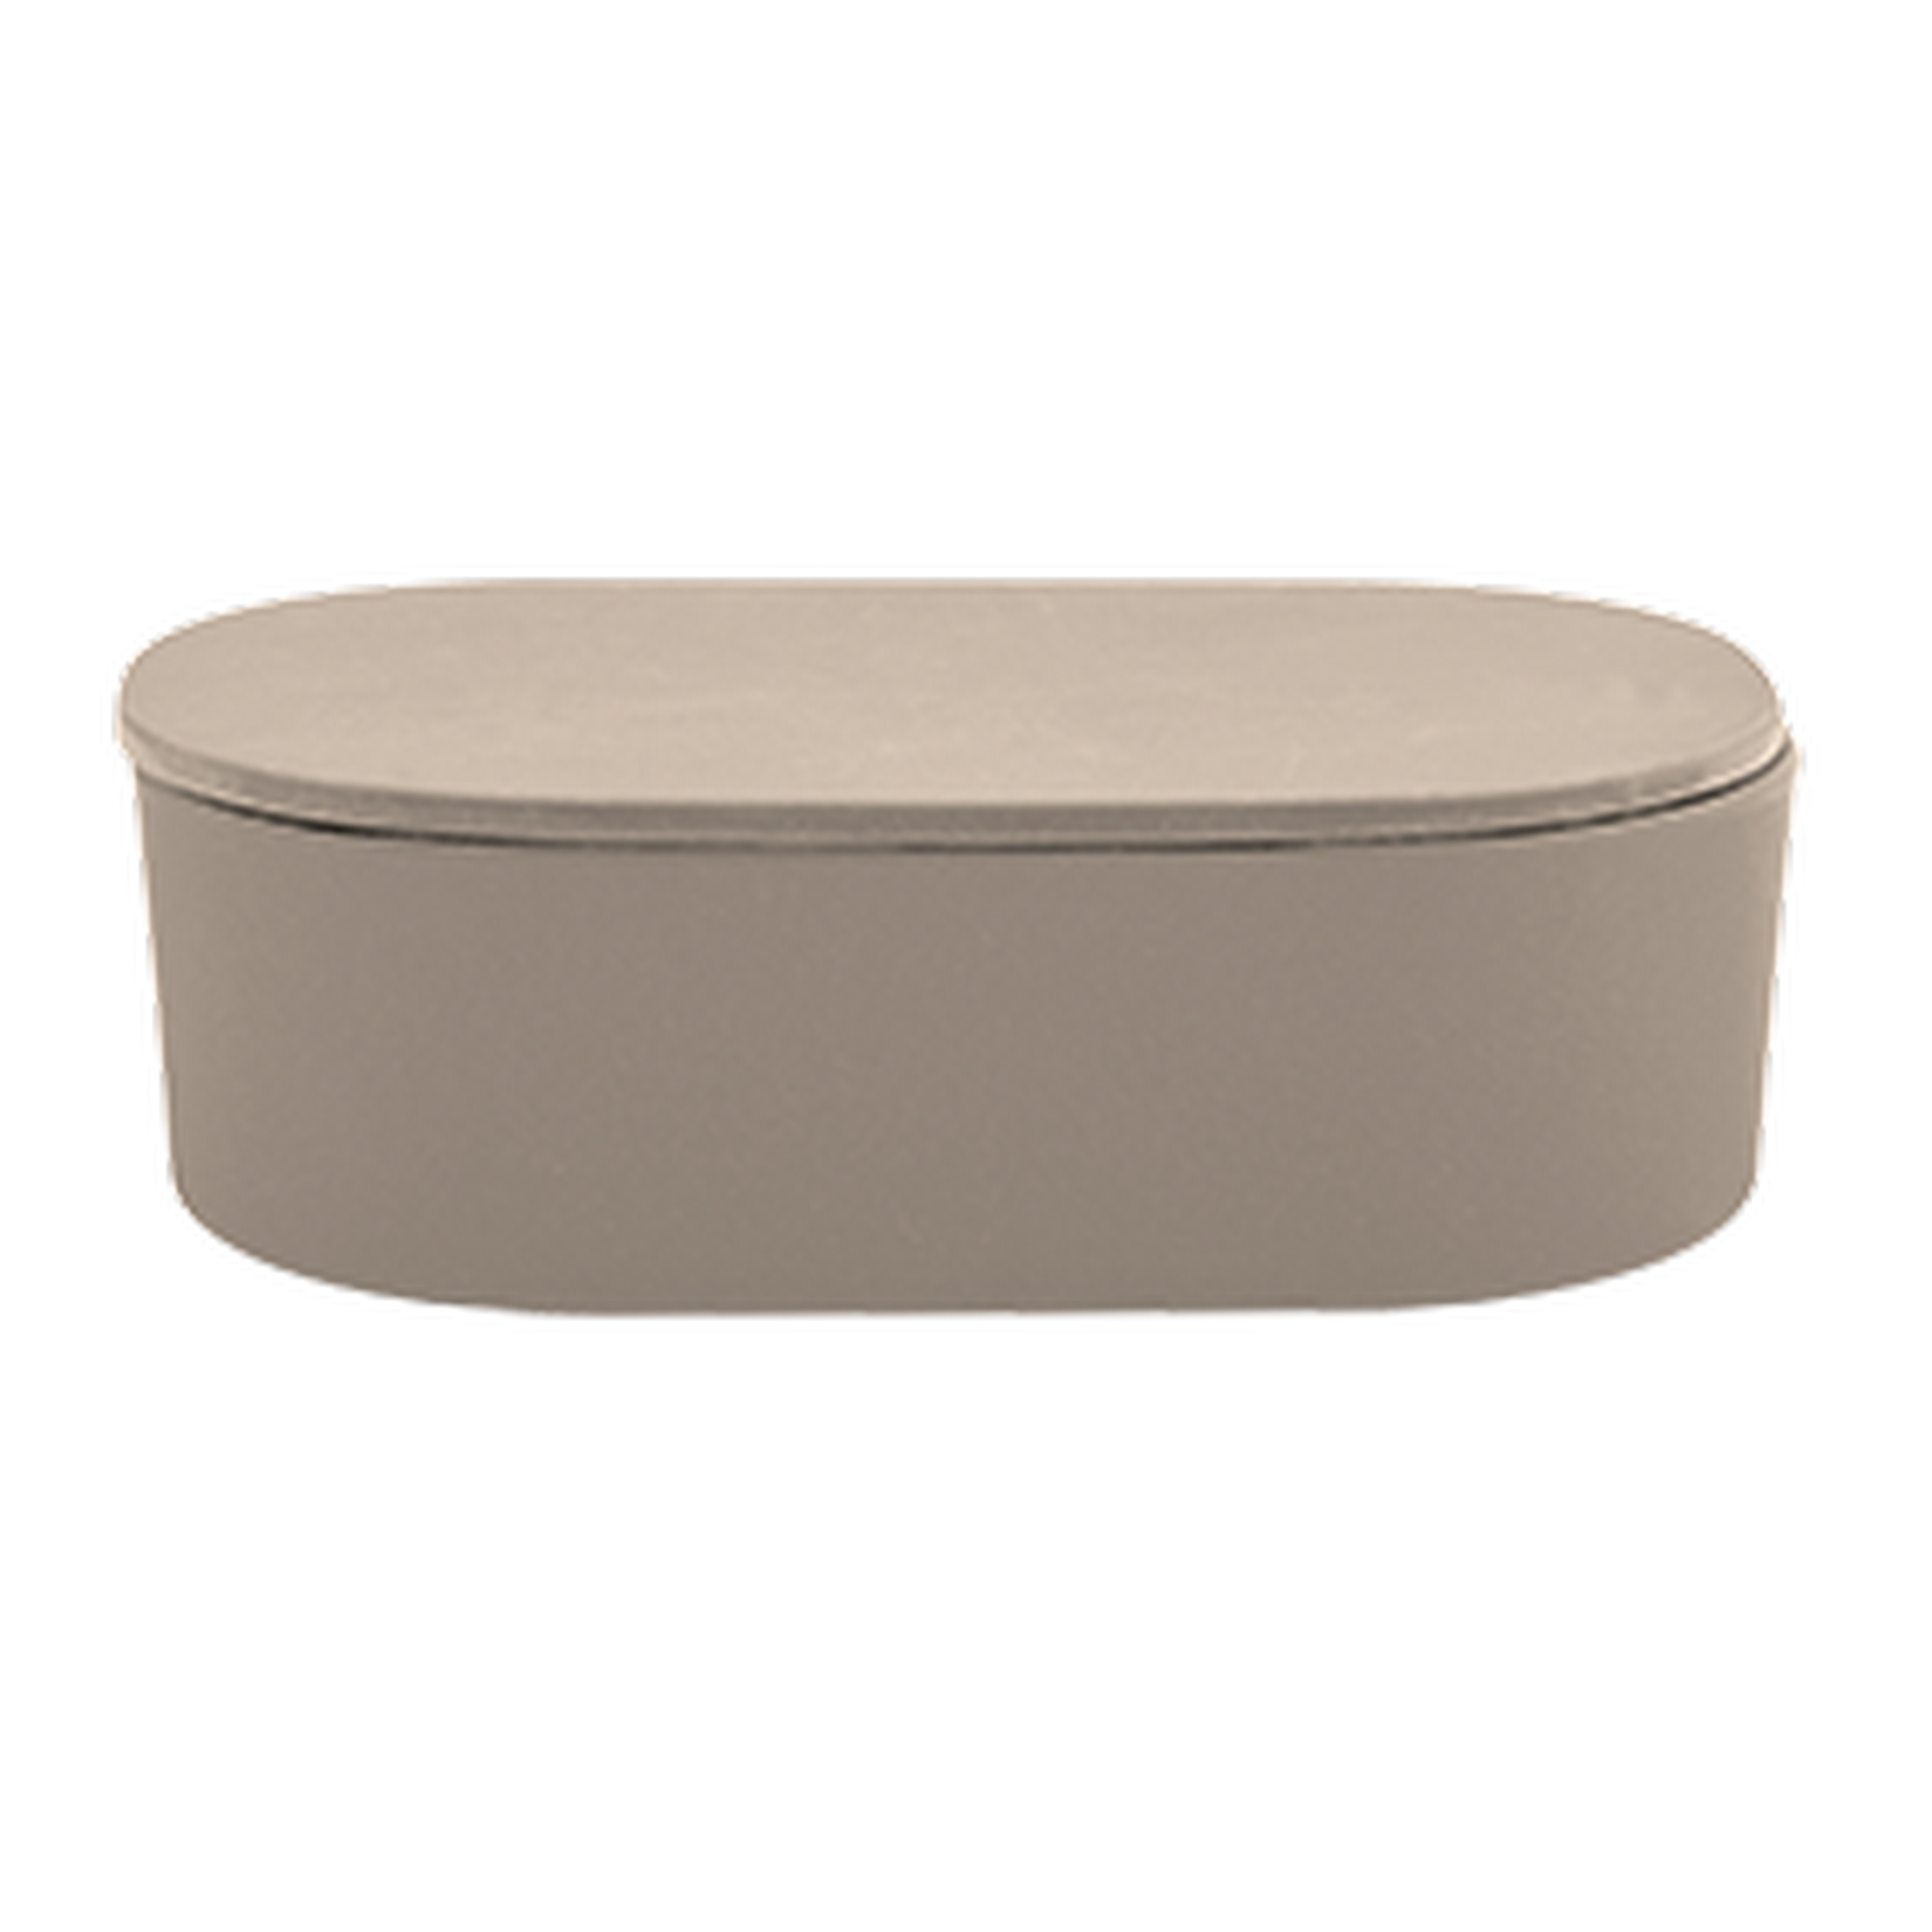 Aufbewahrungsbox 'Takeo' Bambus taupe 18,5 x 12,5 x 7,9 cm + product picture